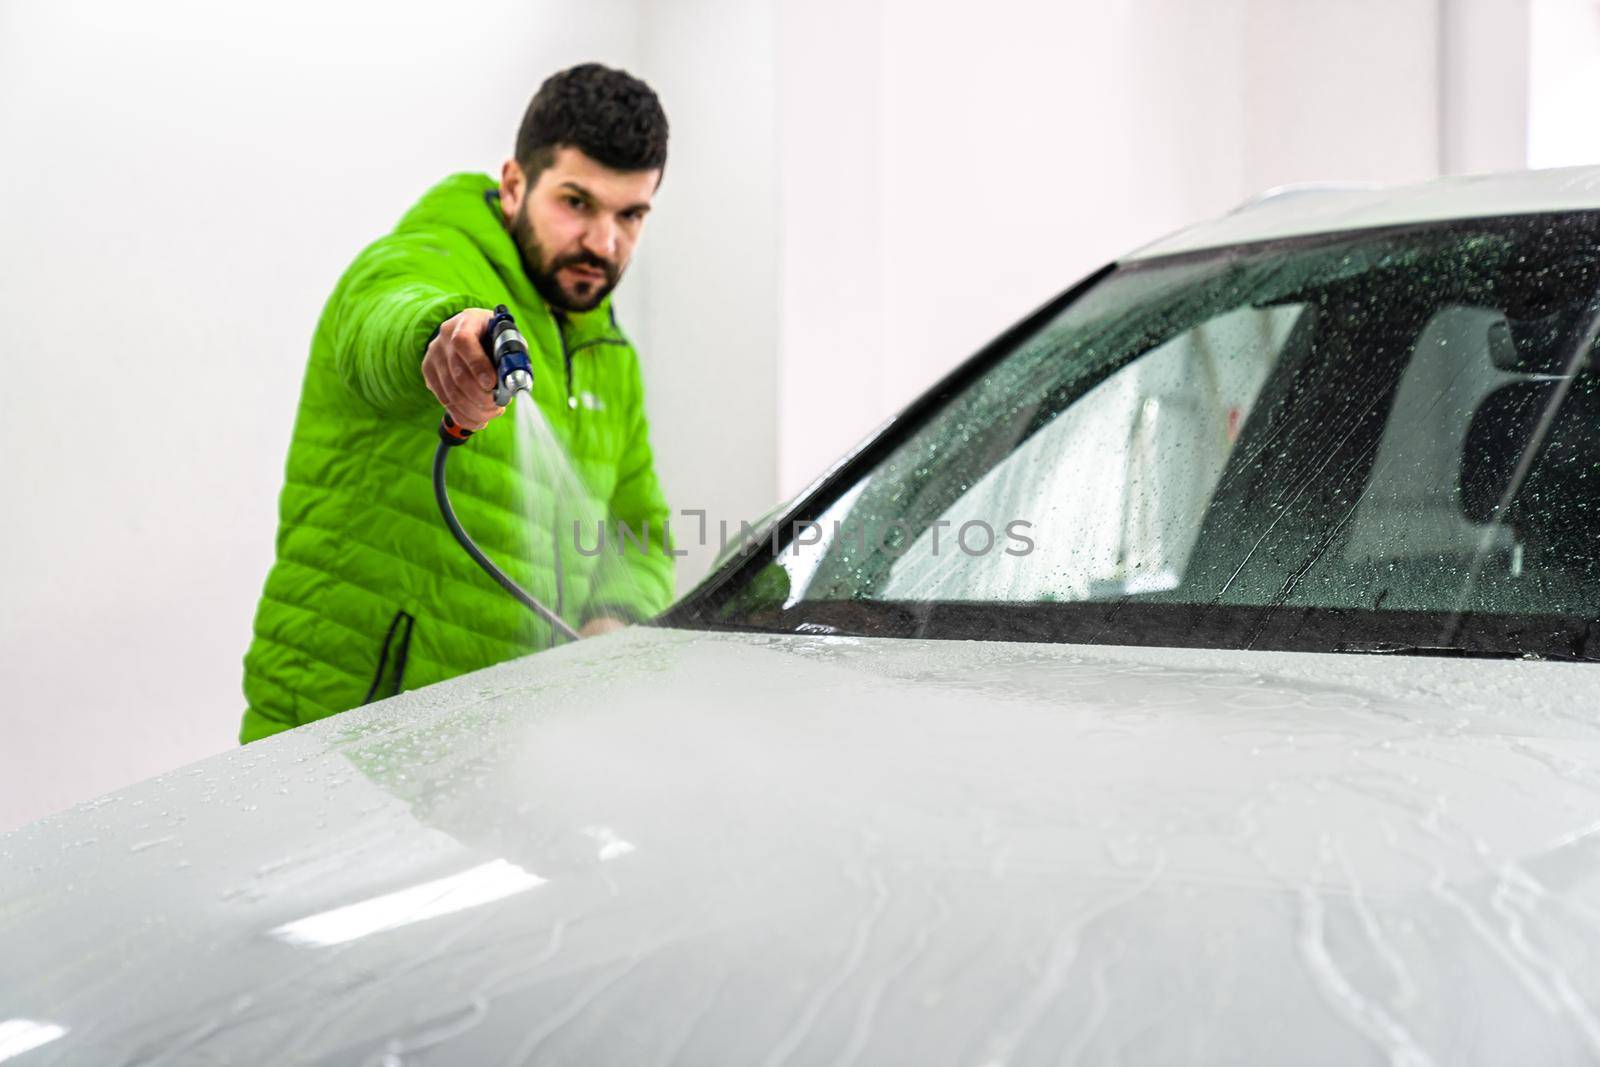 wash the car by spraying water from a high pressure hose with foam.